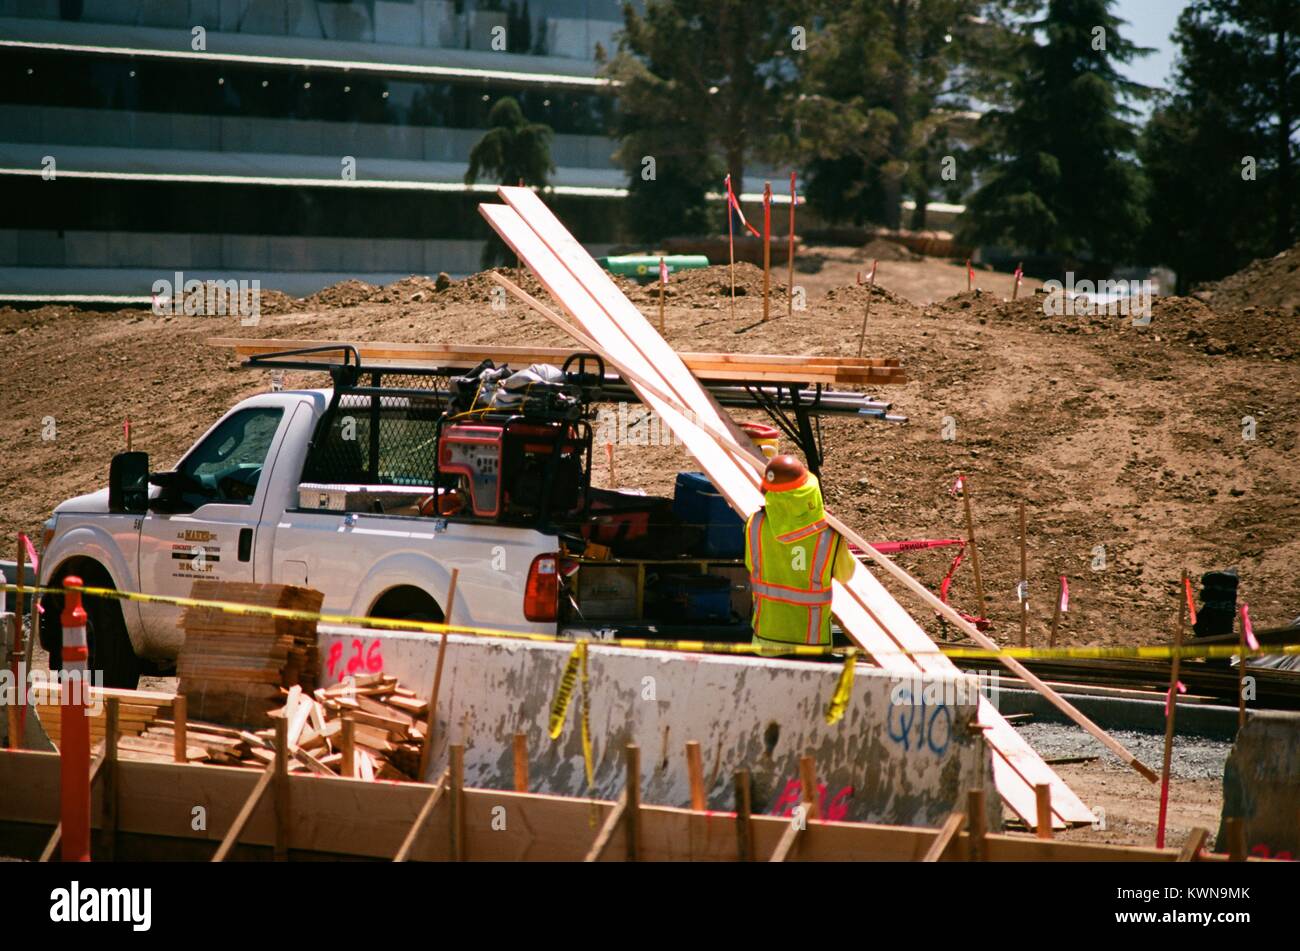 Closeup of a construction worker with a high visibility vest loading construction materials onto a pickup truck, with portion of the main building visible, at the Apple Park, known colloquially as 'The Spaceship', the new headquarters of Apple Inc in the Silicon Valley town of Cupertino, California, July 25, 2017. Stock Photo